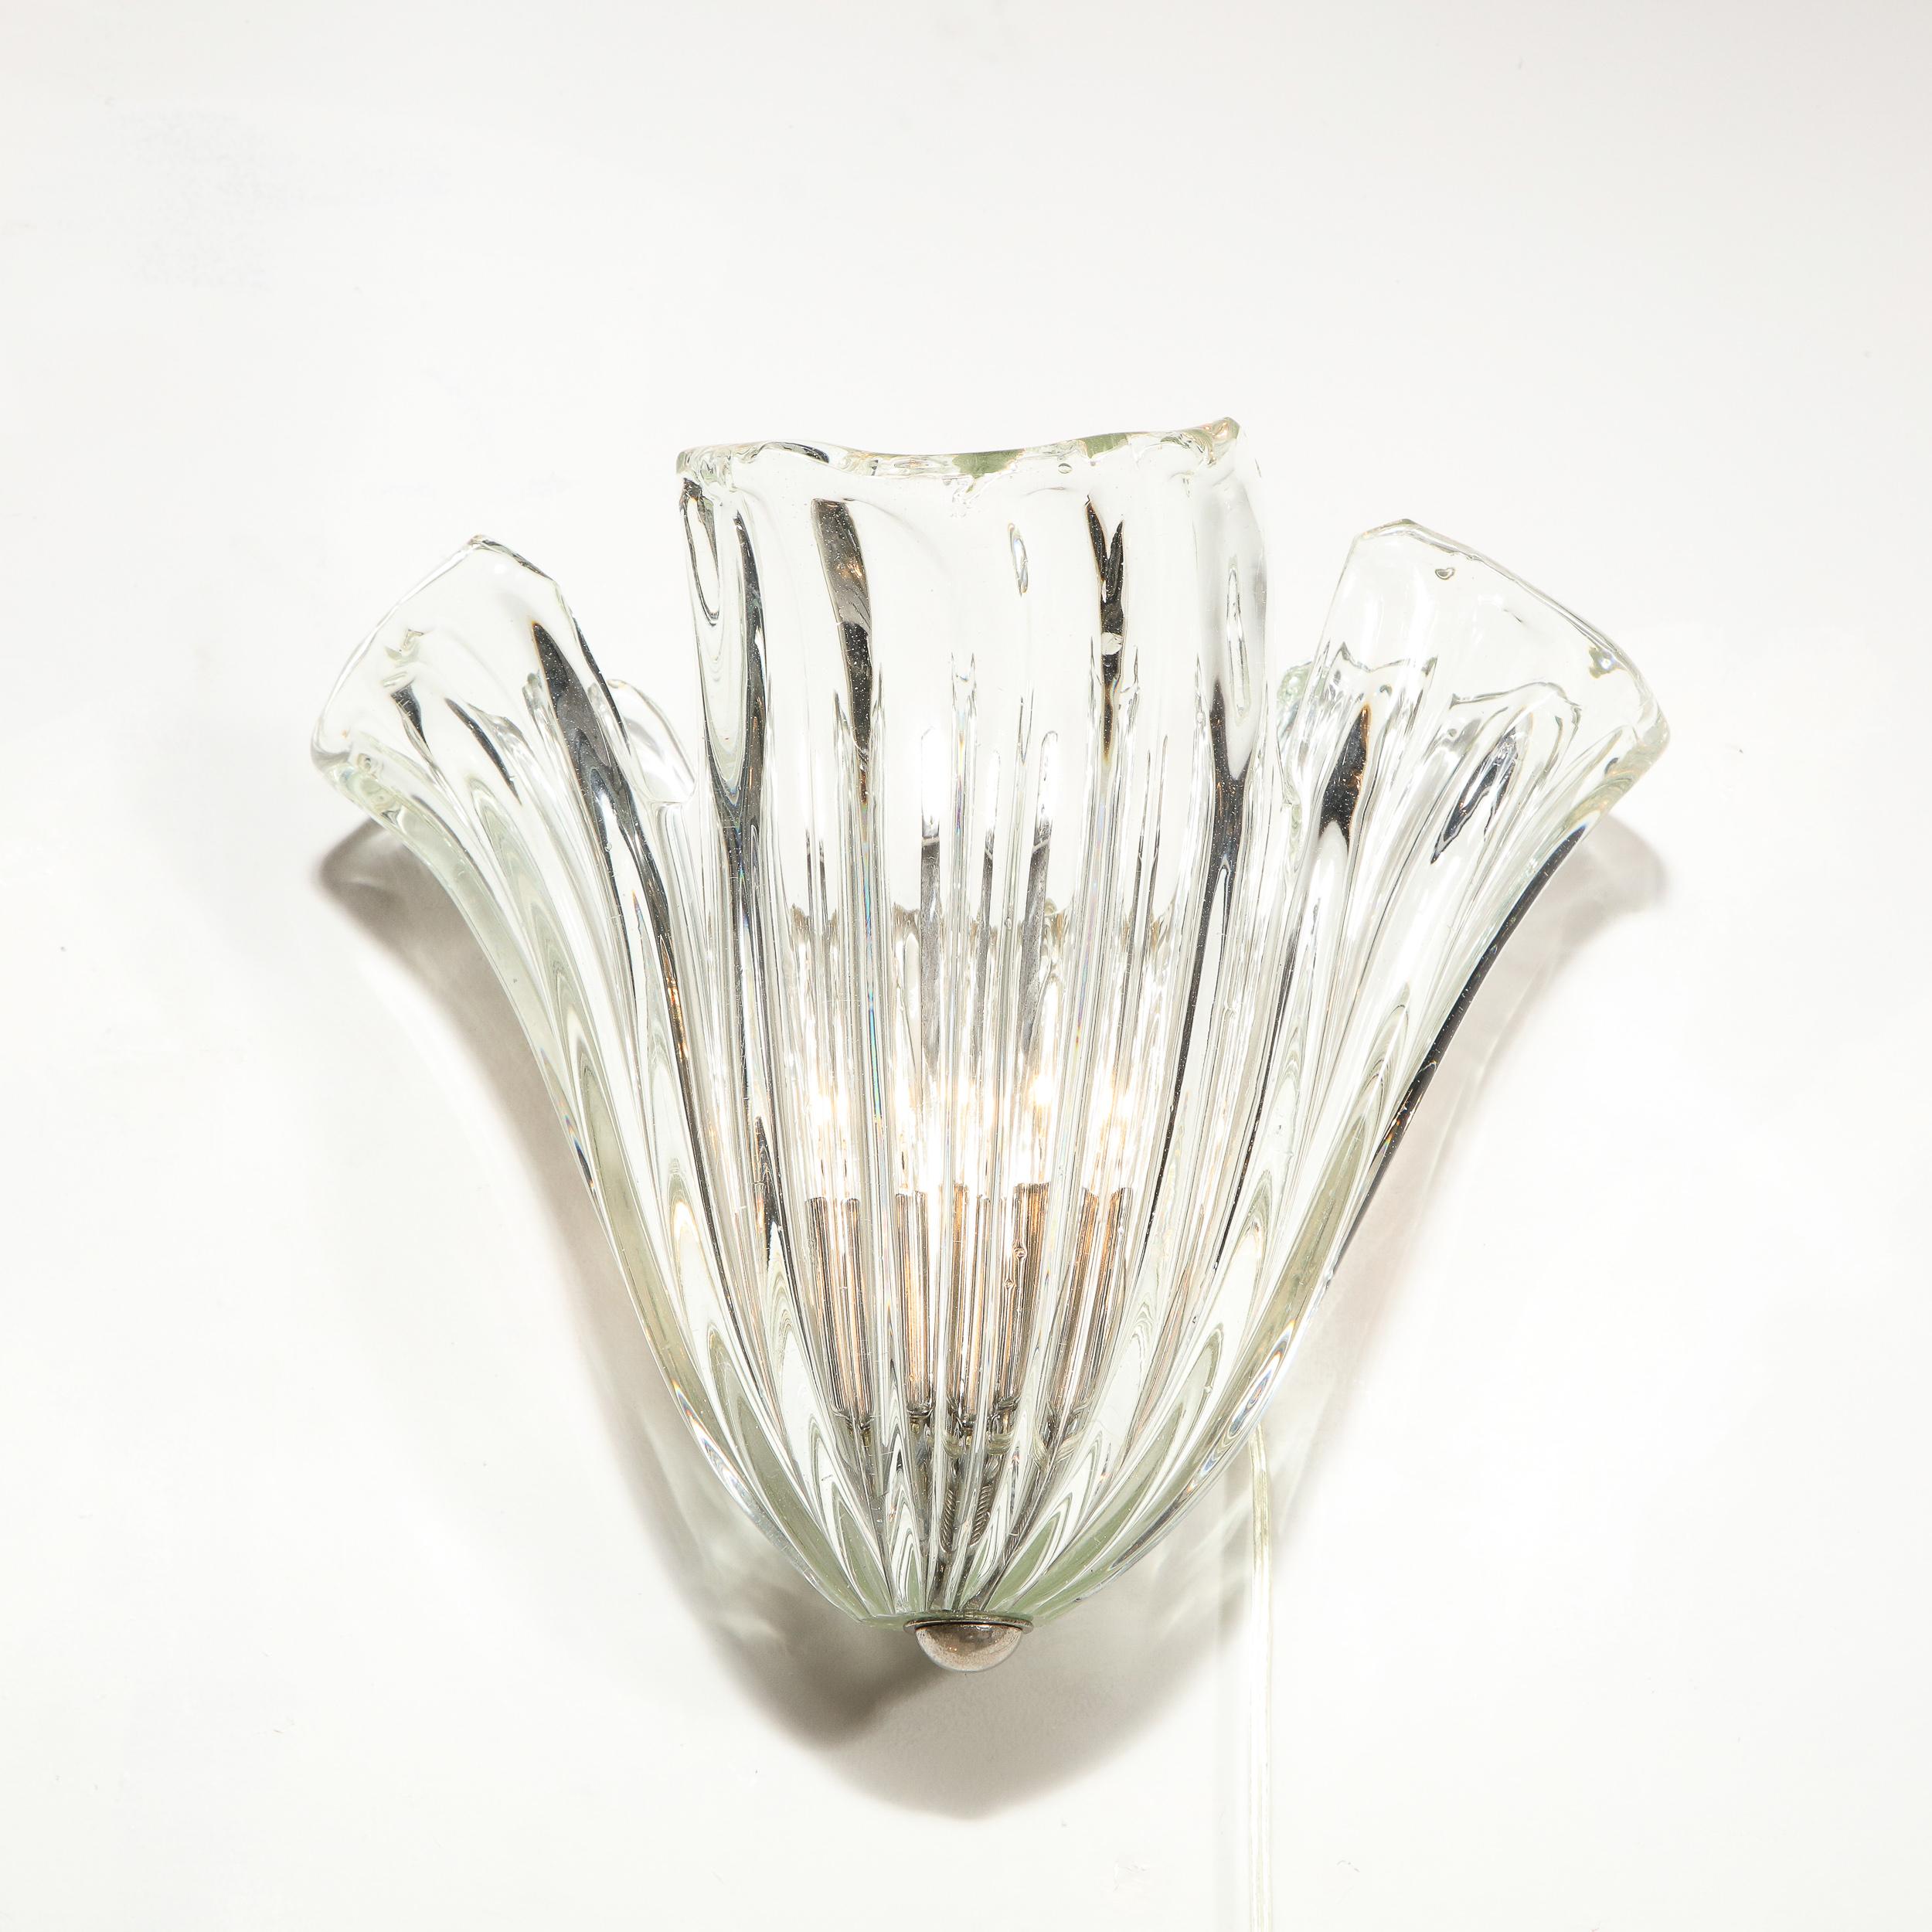 This stunning pair of Mid-Century Modern sconces were realized by the fabled Italian atelier of Barovier e Toso, circa 1950. They feature translucent channeled bodies that taper to their base, suggesting abstracted anemones, with stylized slits at